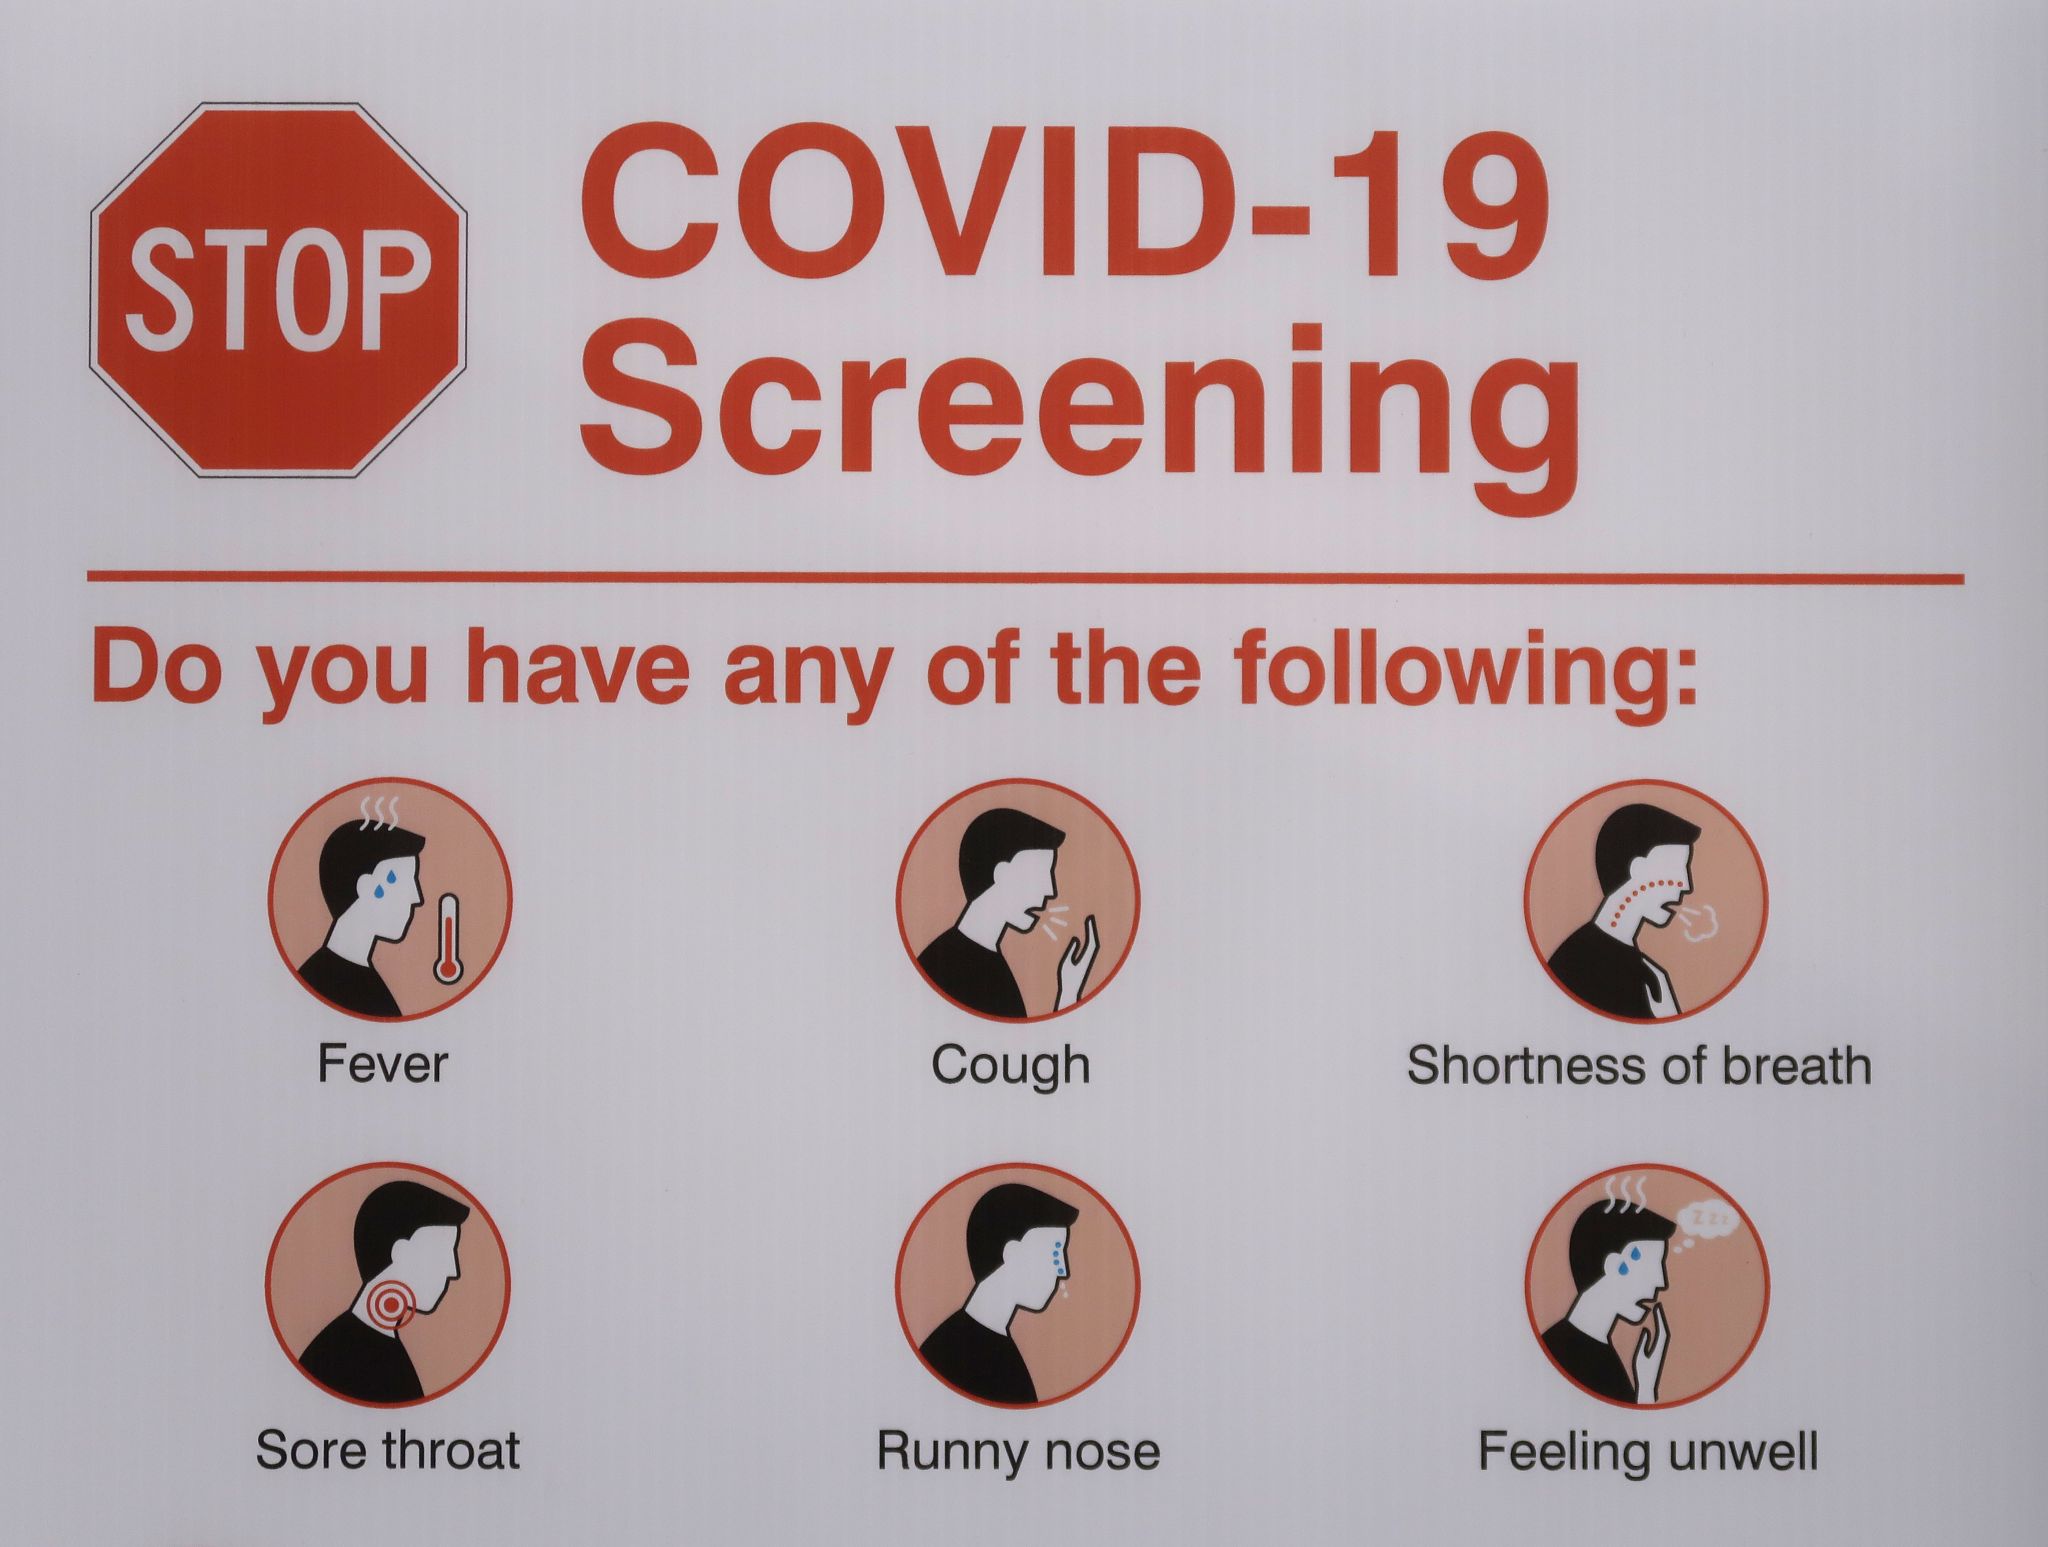 COVID19, common cold or the flu? Here's how to tell which illness your